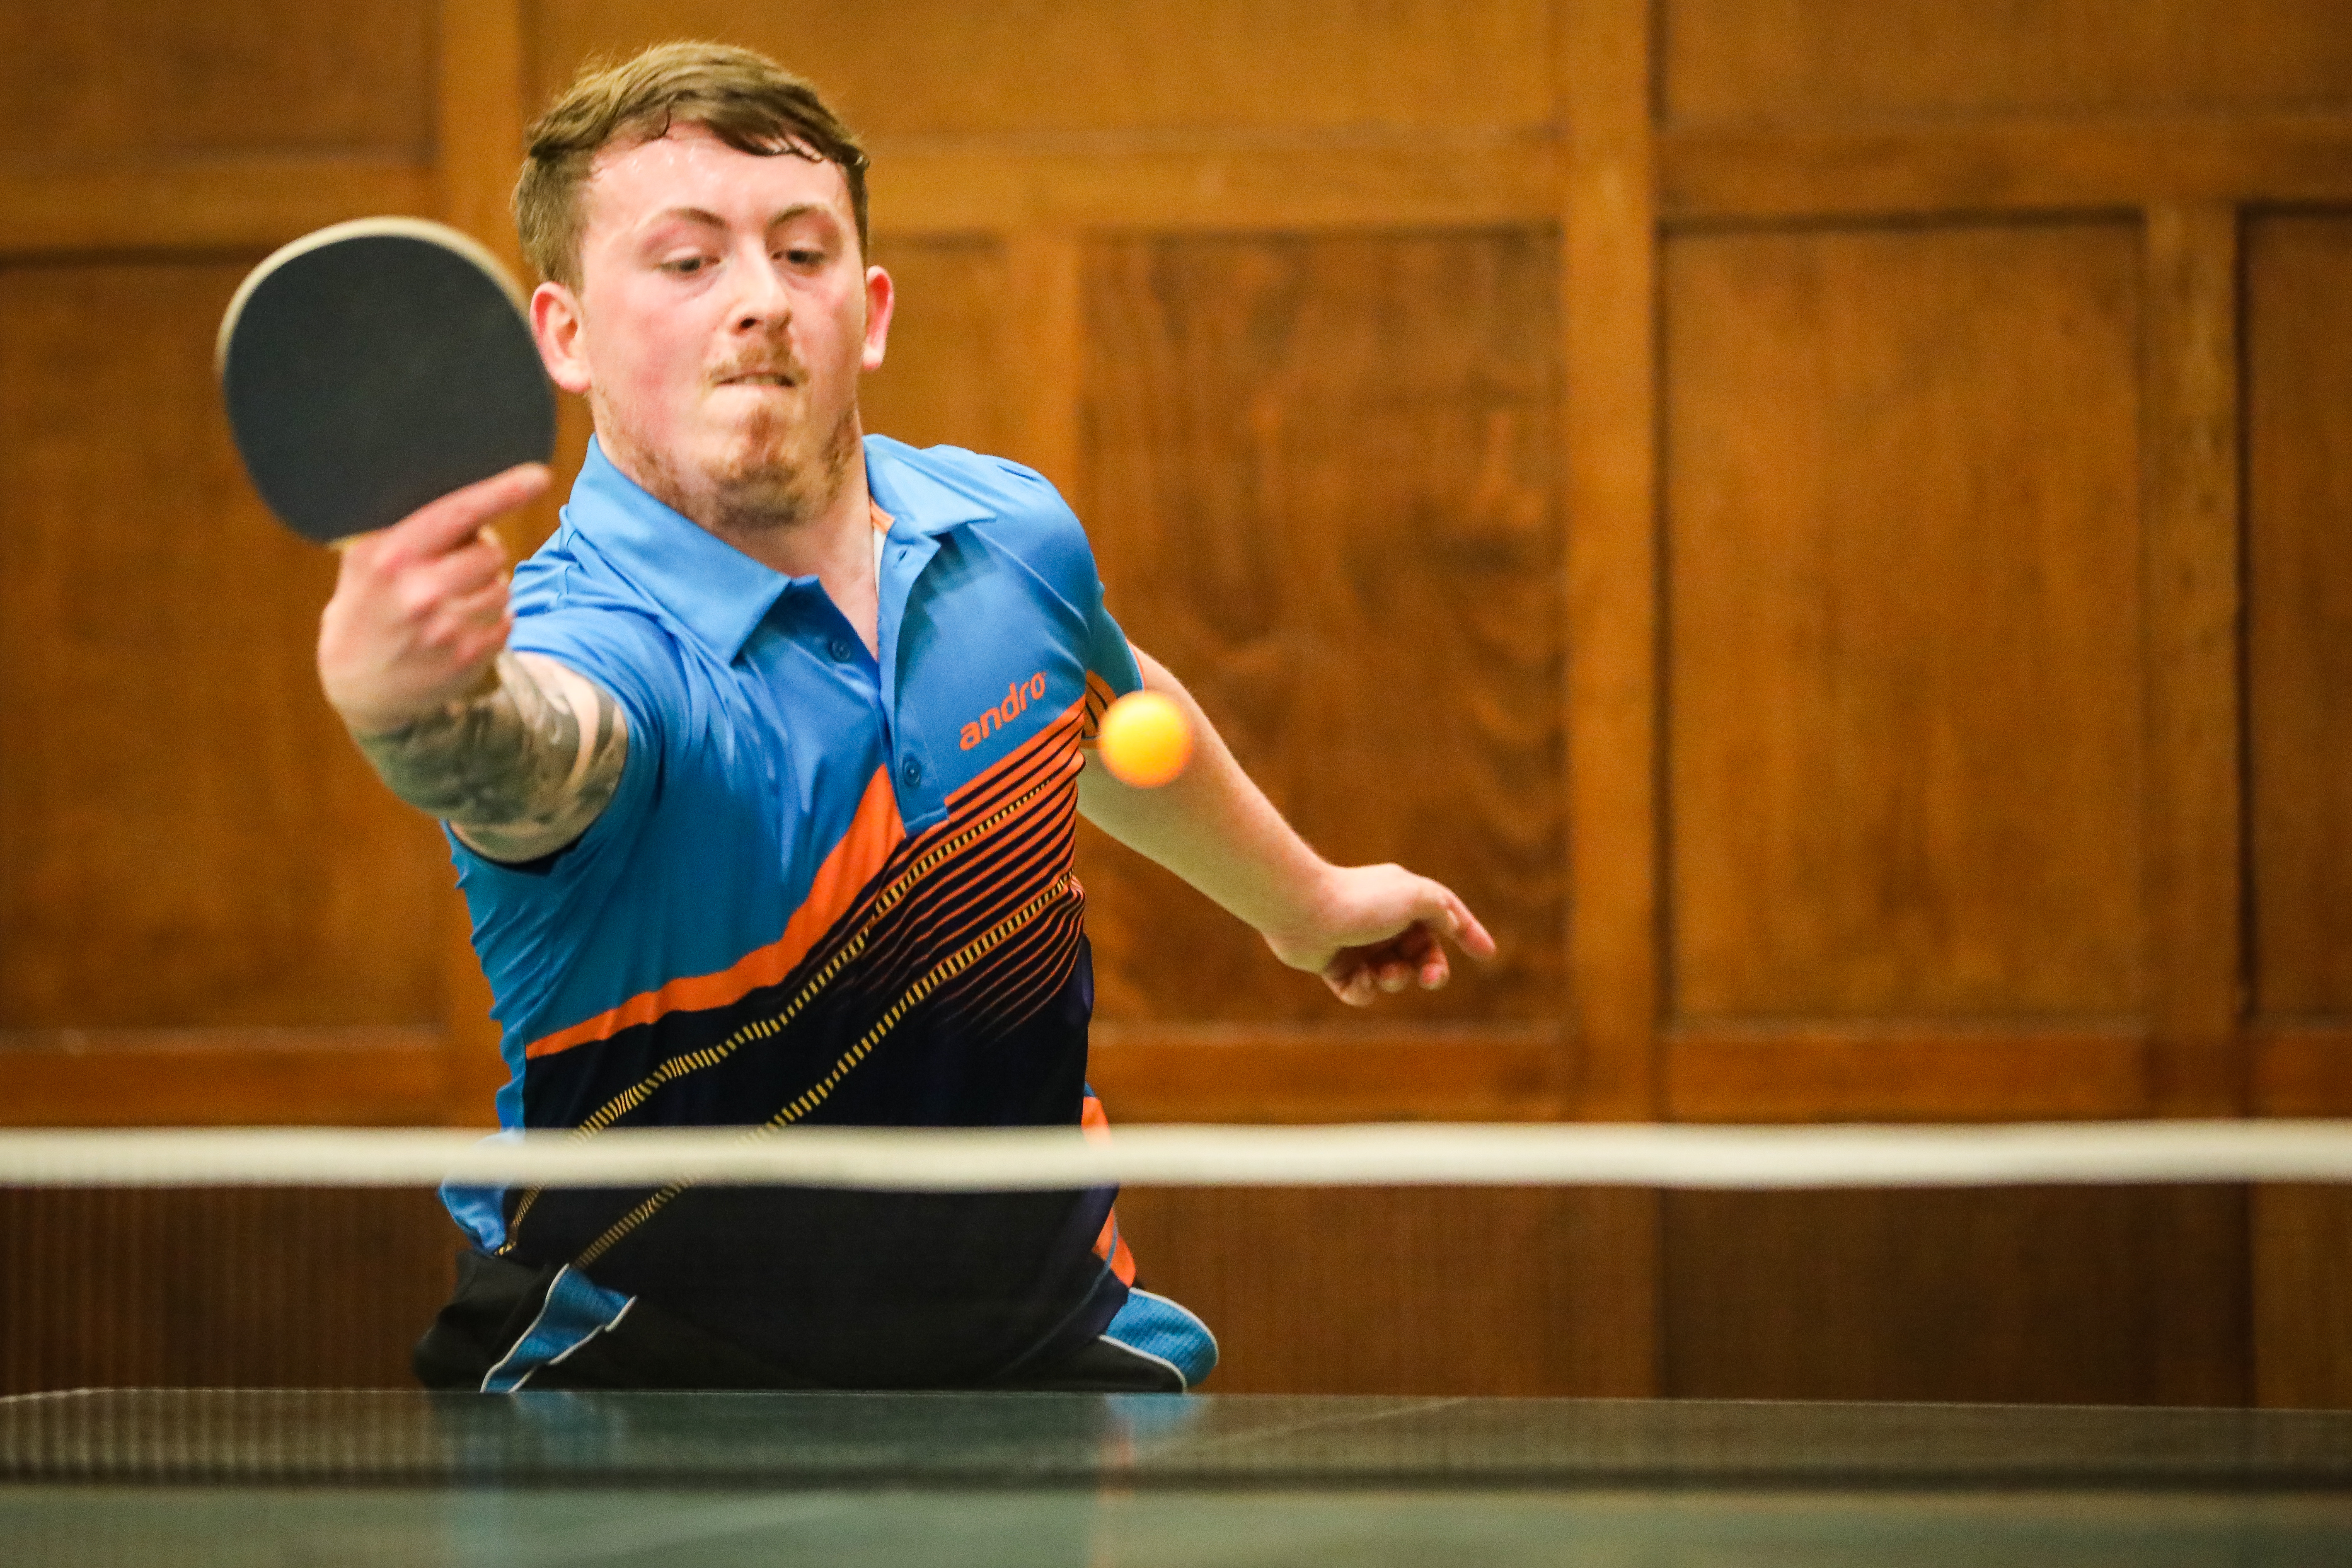 Action from the Scottish Ping Pong Championships held in Dundee on Saturday.